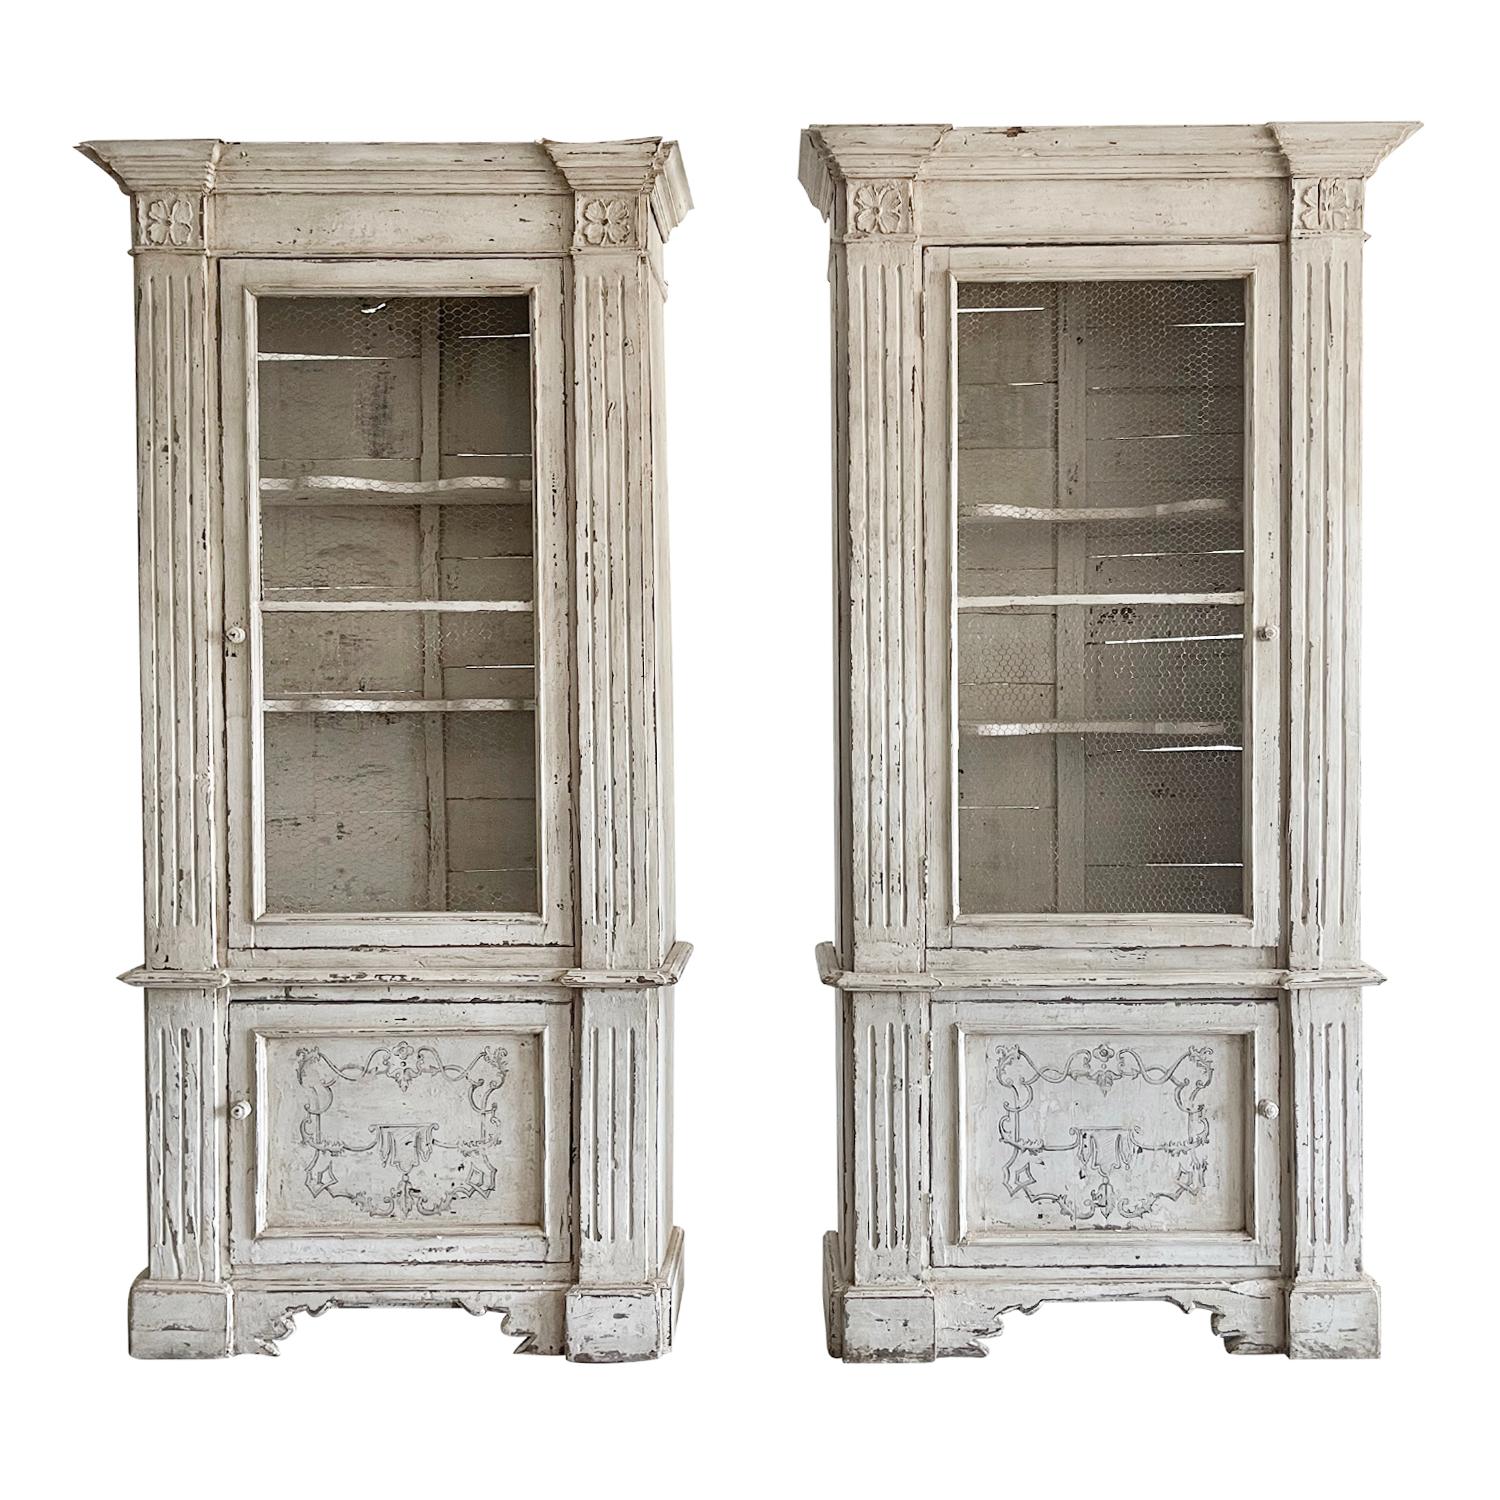 An antique distinctive pair of 18th century display cabinets with a tall crown molding, made of solid walnut, original hardware and painted interior, in good condition. The upper doors have the typical decorative mesh screen doors and three shelves